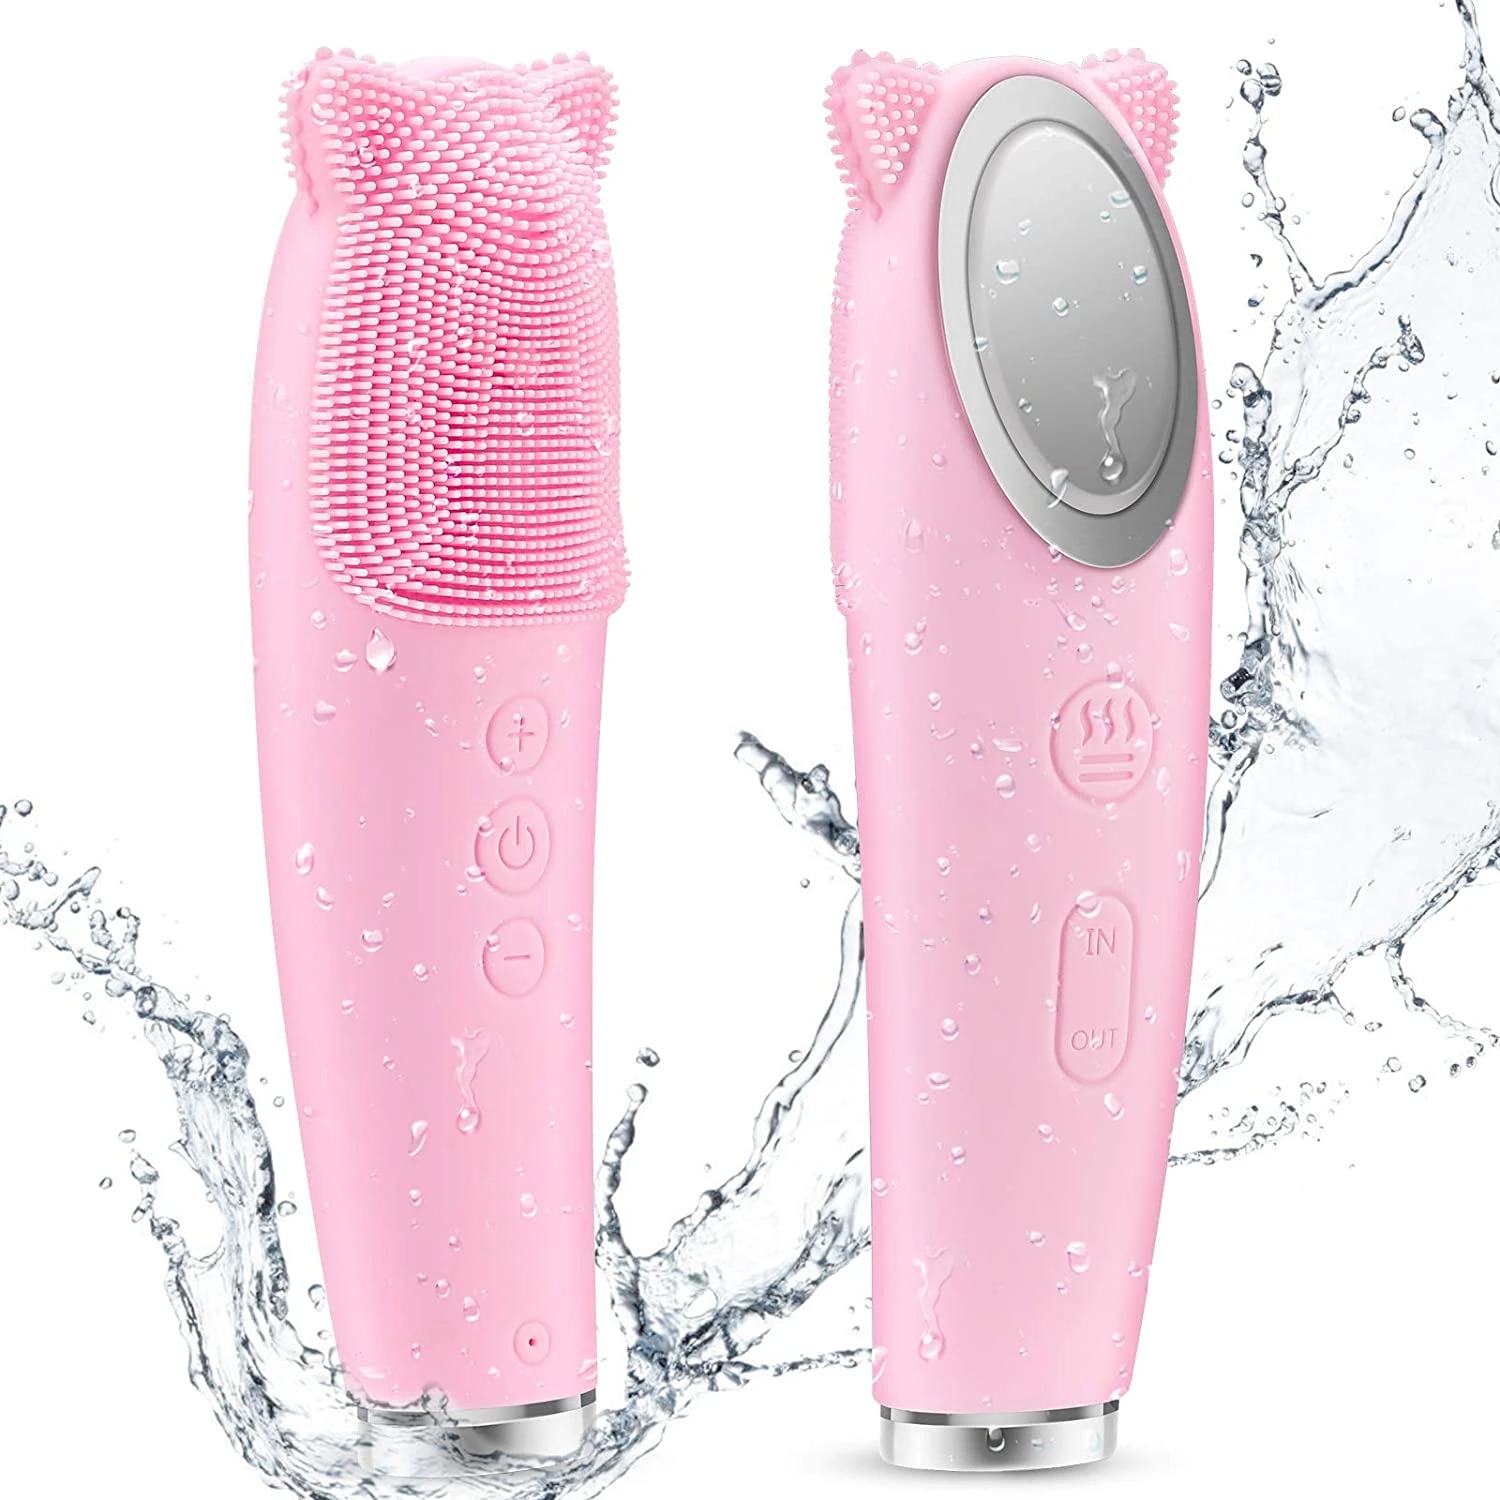 Chaleance mini manual electric vibrating face brush facial massage cleansing device silicone